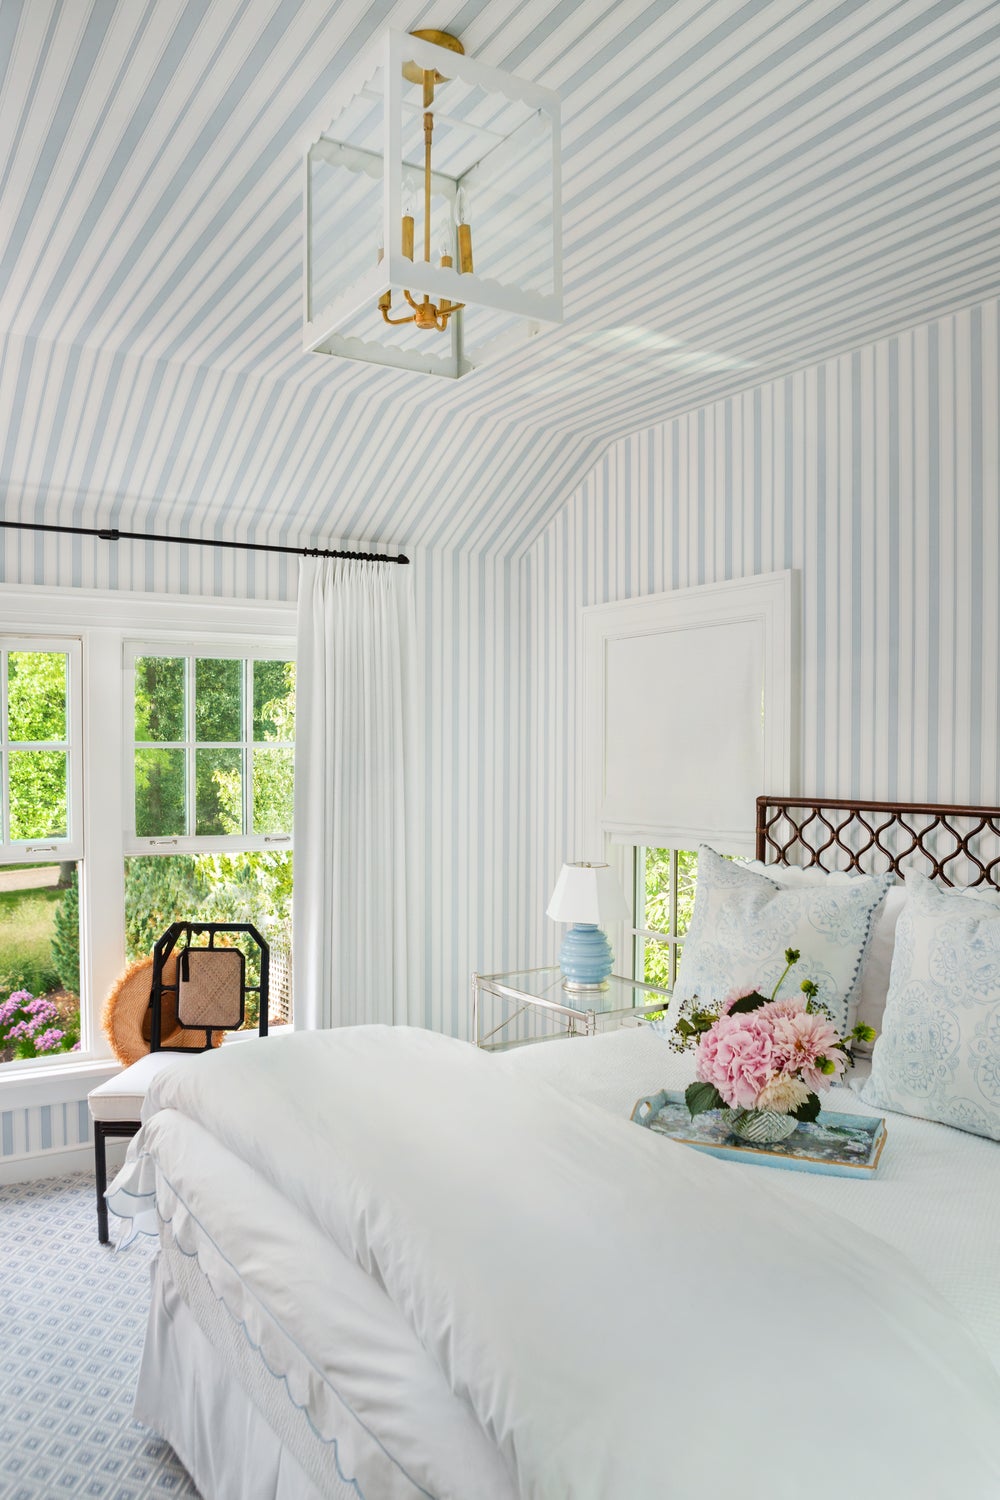 Bedroom by Page Louisell Design on 1stdibs